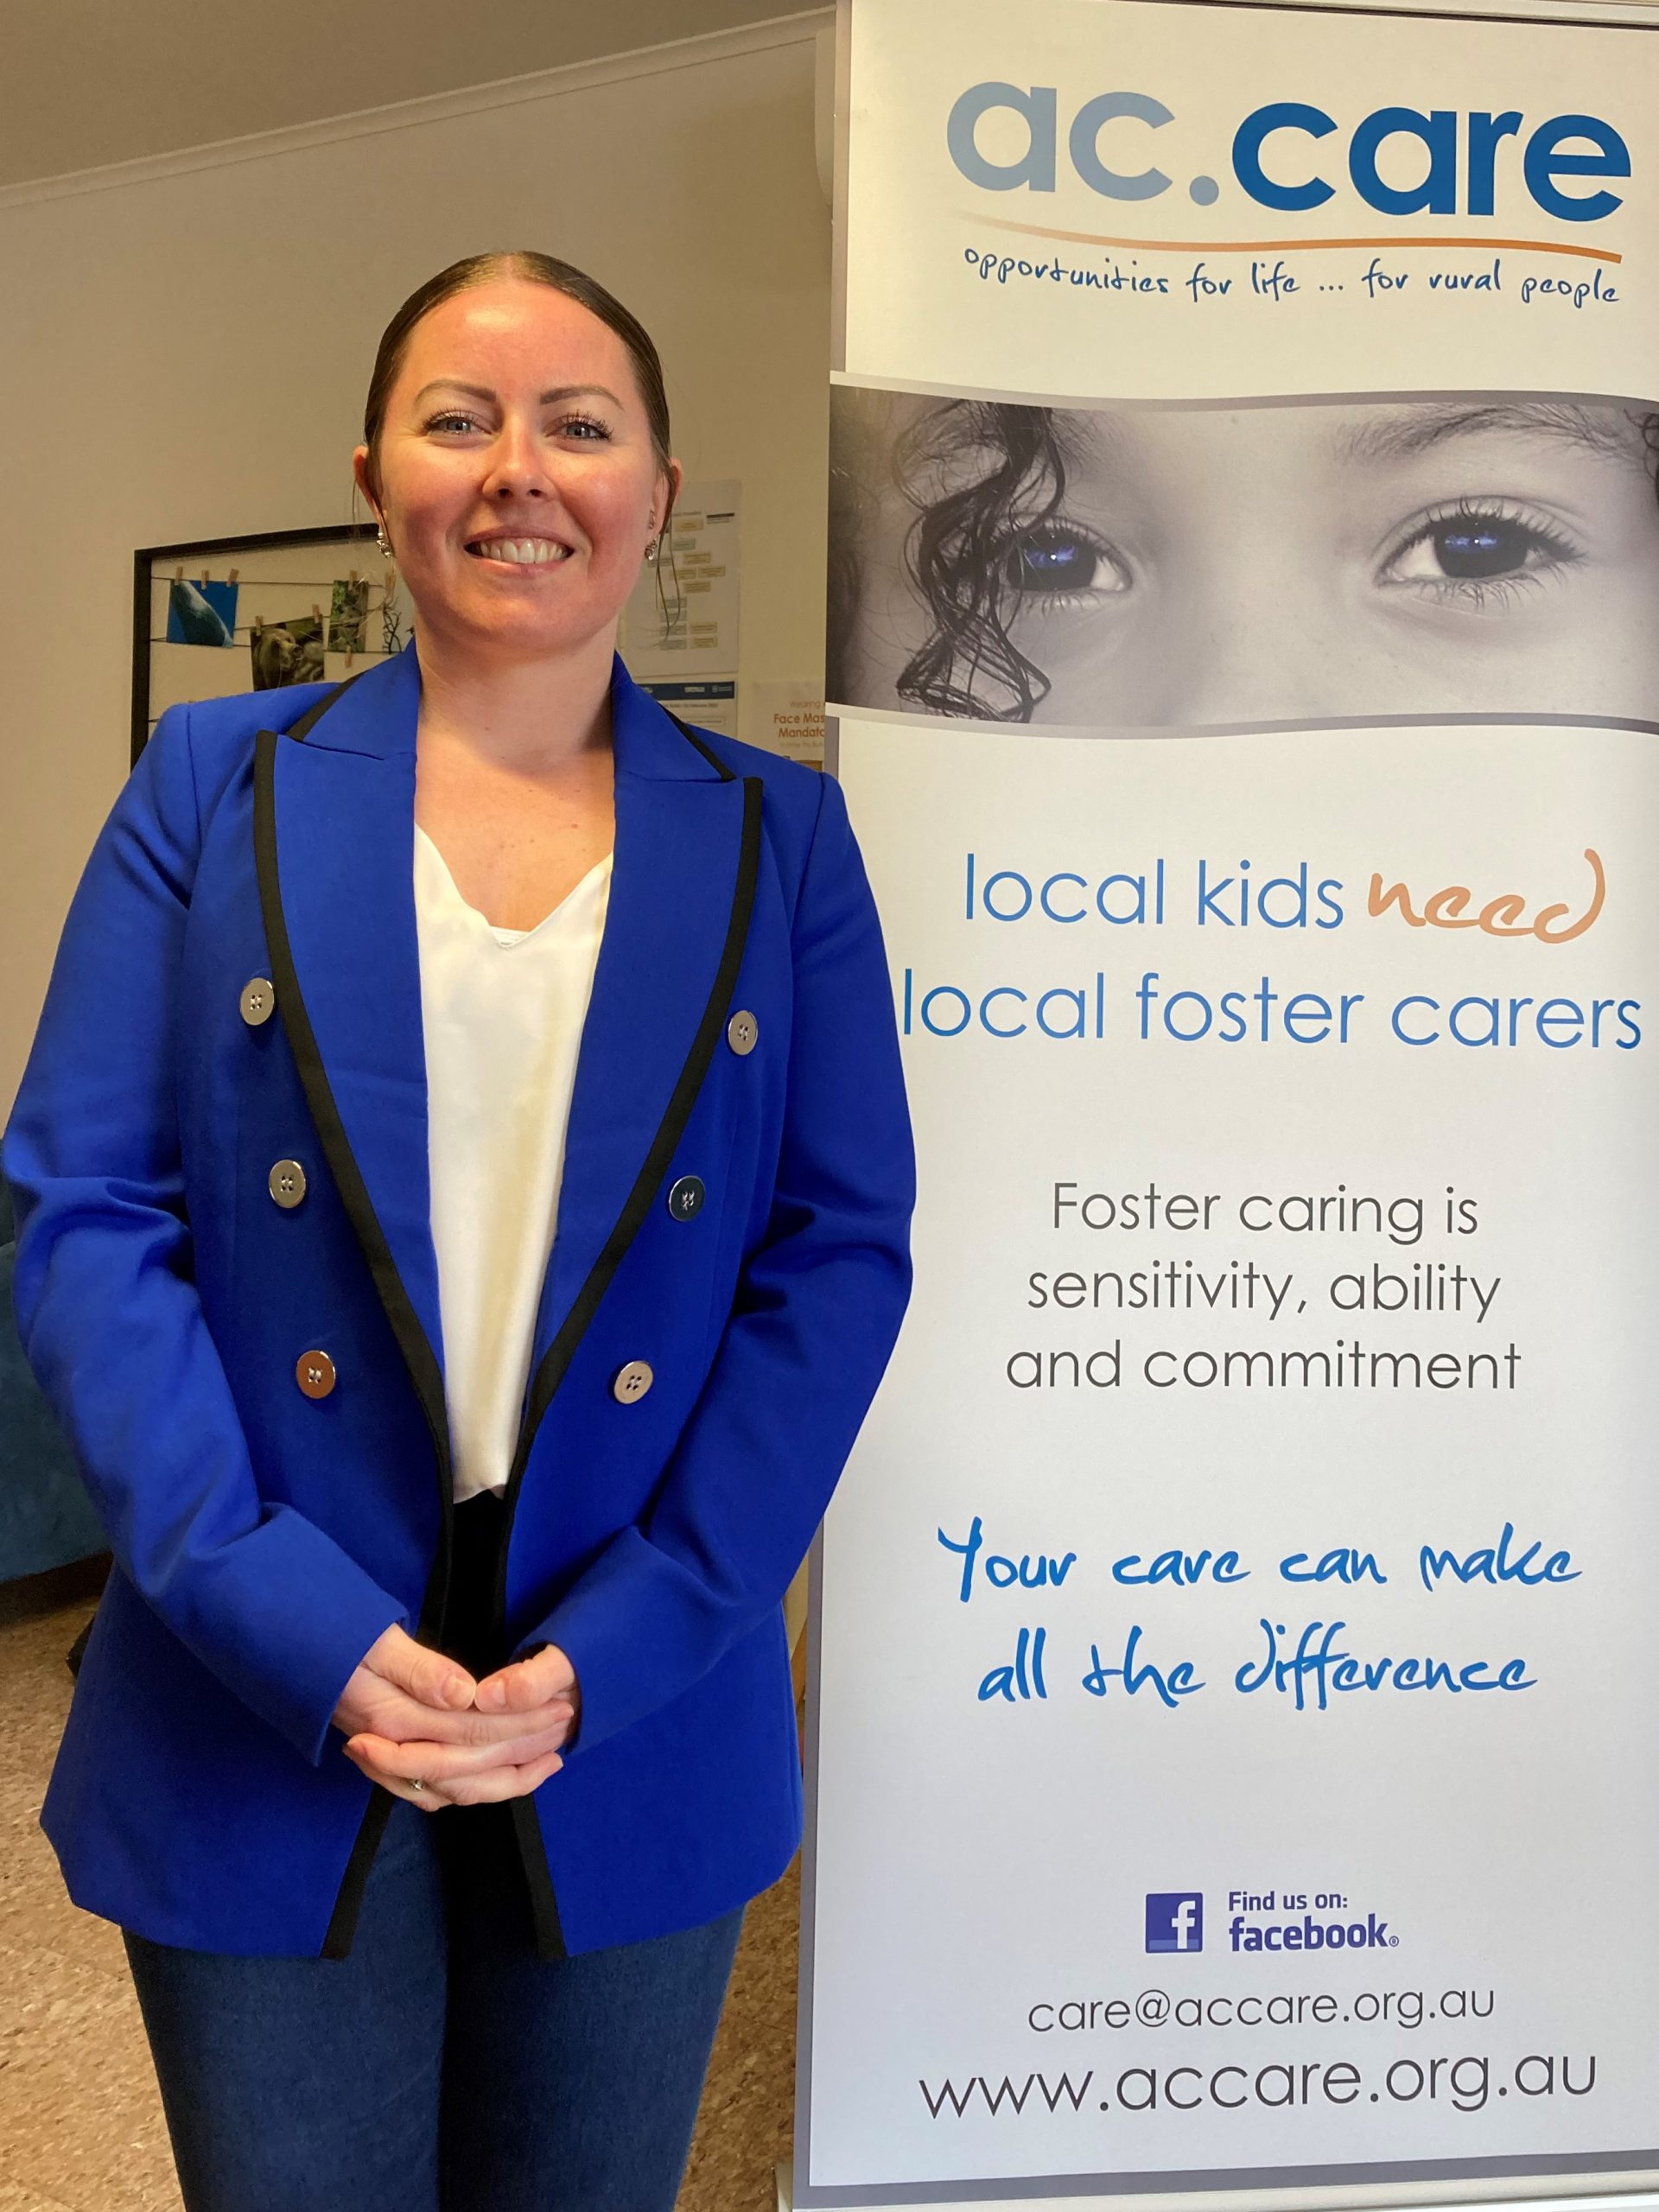 CALL FOR CARERS: ac.care foster care manager Dani Atkinson is encouraging caring adults living in regional South Australia to join the agency’s carer network to ensure the state’s most vulnerable babies, children and young people have safety, care and support when they need it most.